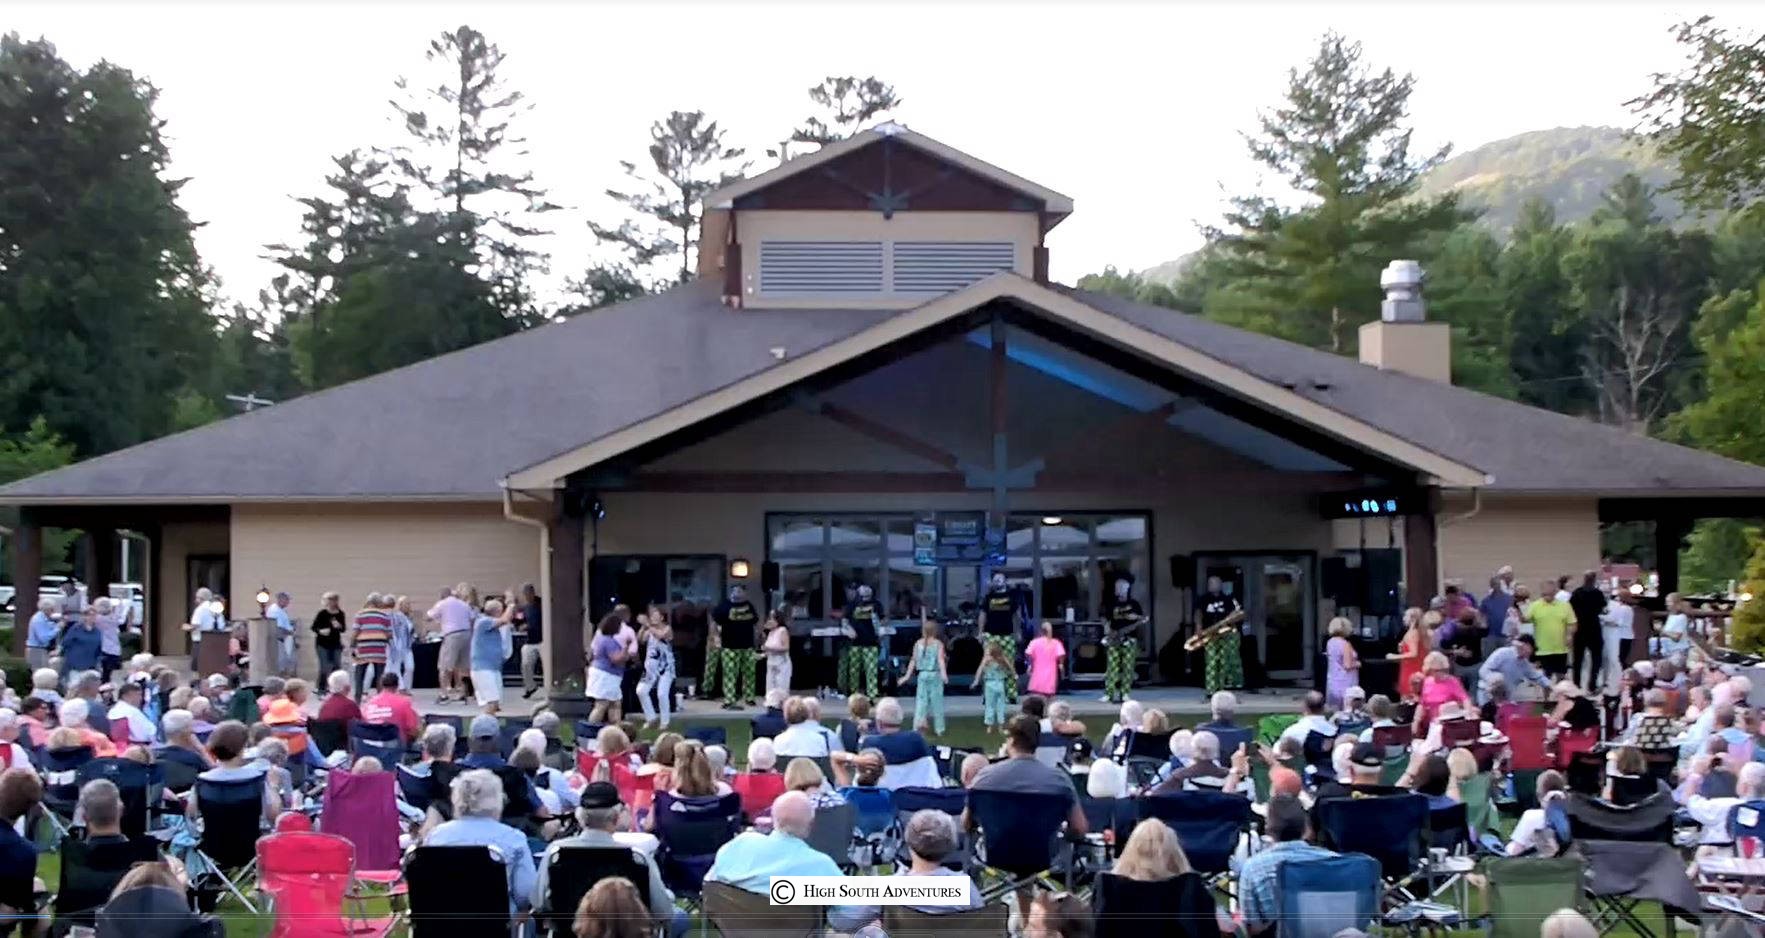 concerts on the slopes, sapphire valley resort